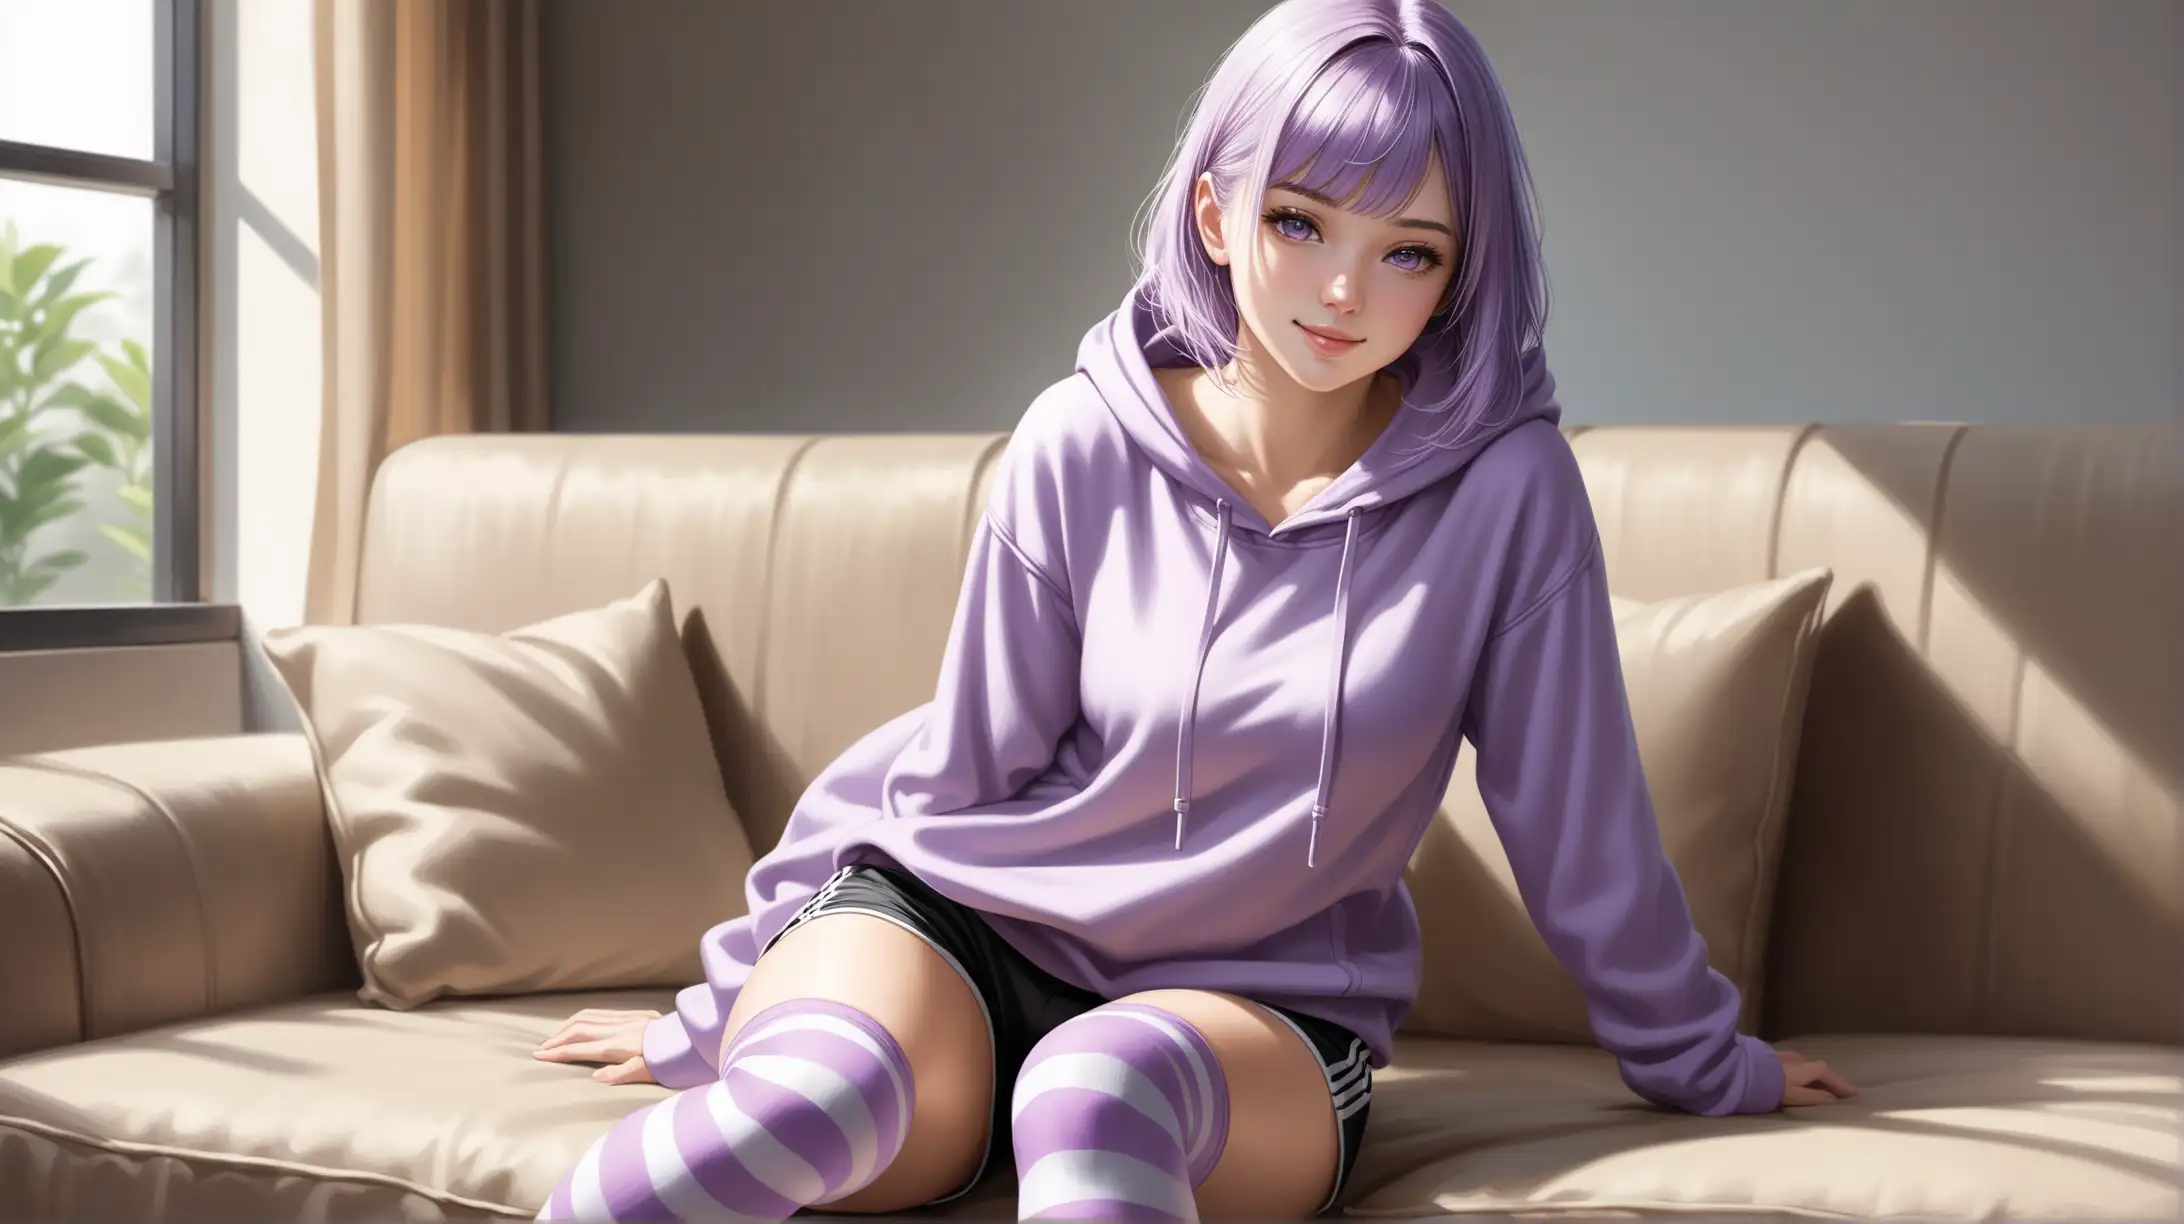 Seductive Woman in Purple Hair and Athletic Attire Sitting on Sofa